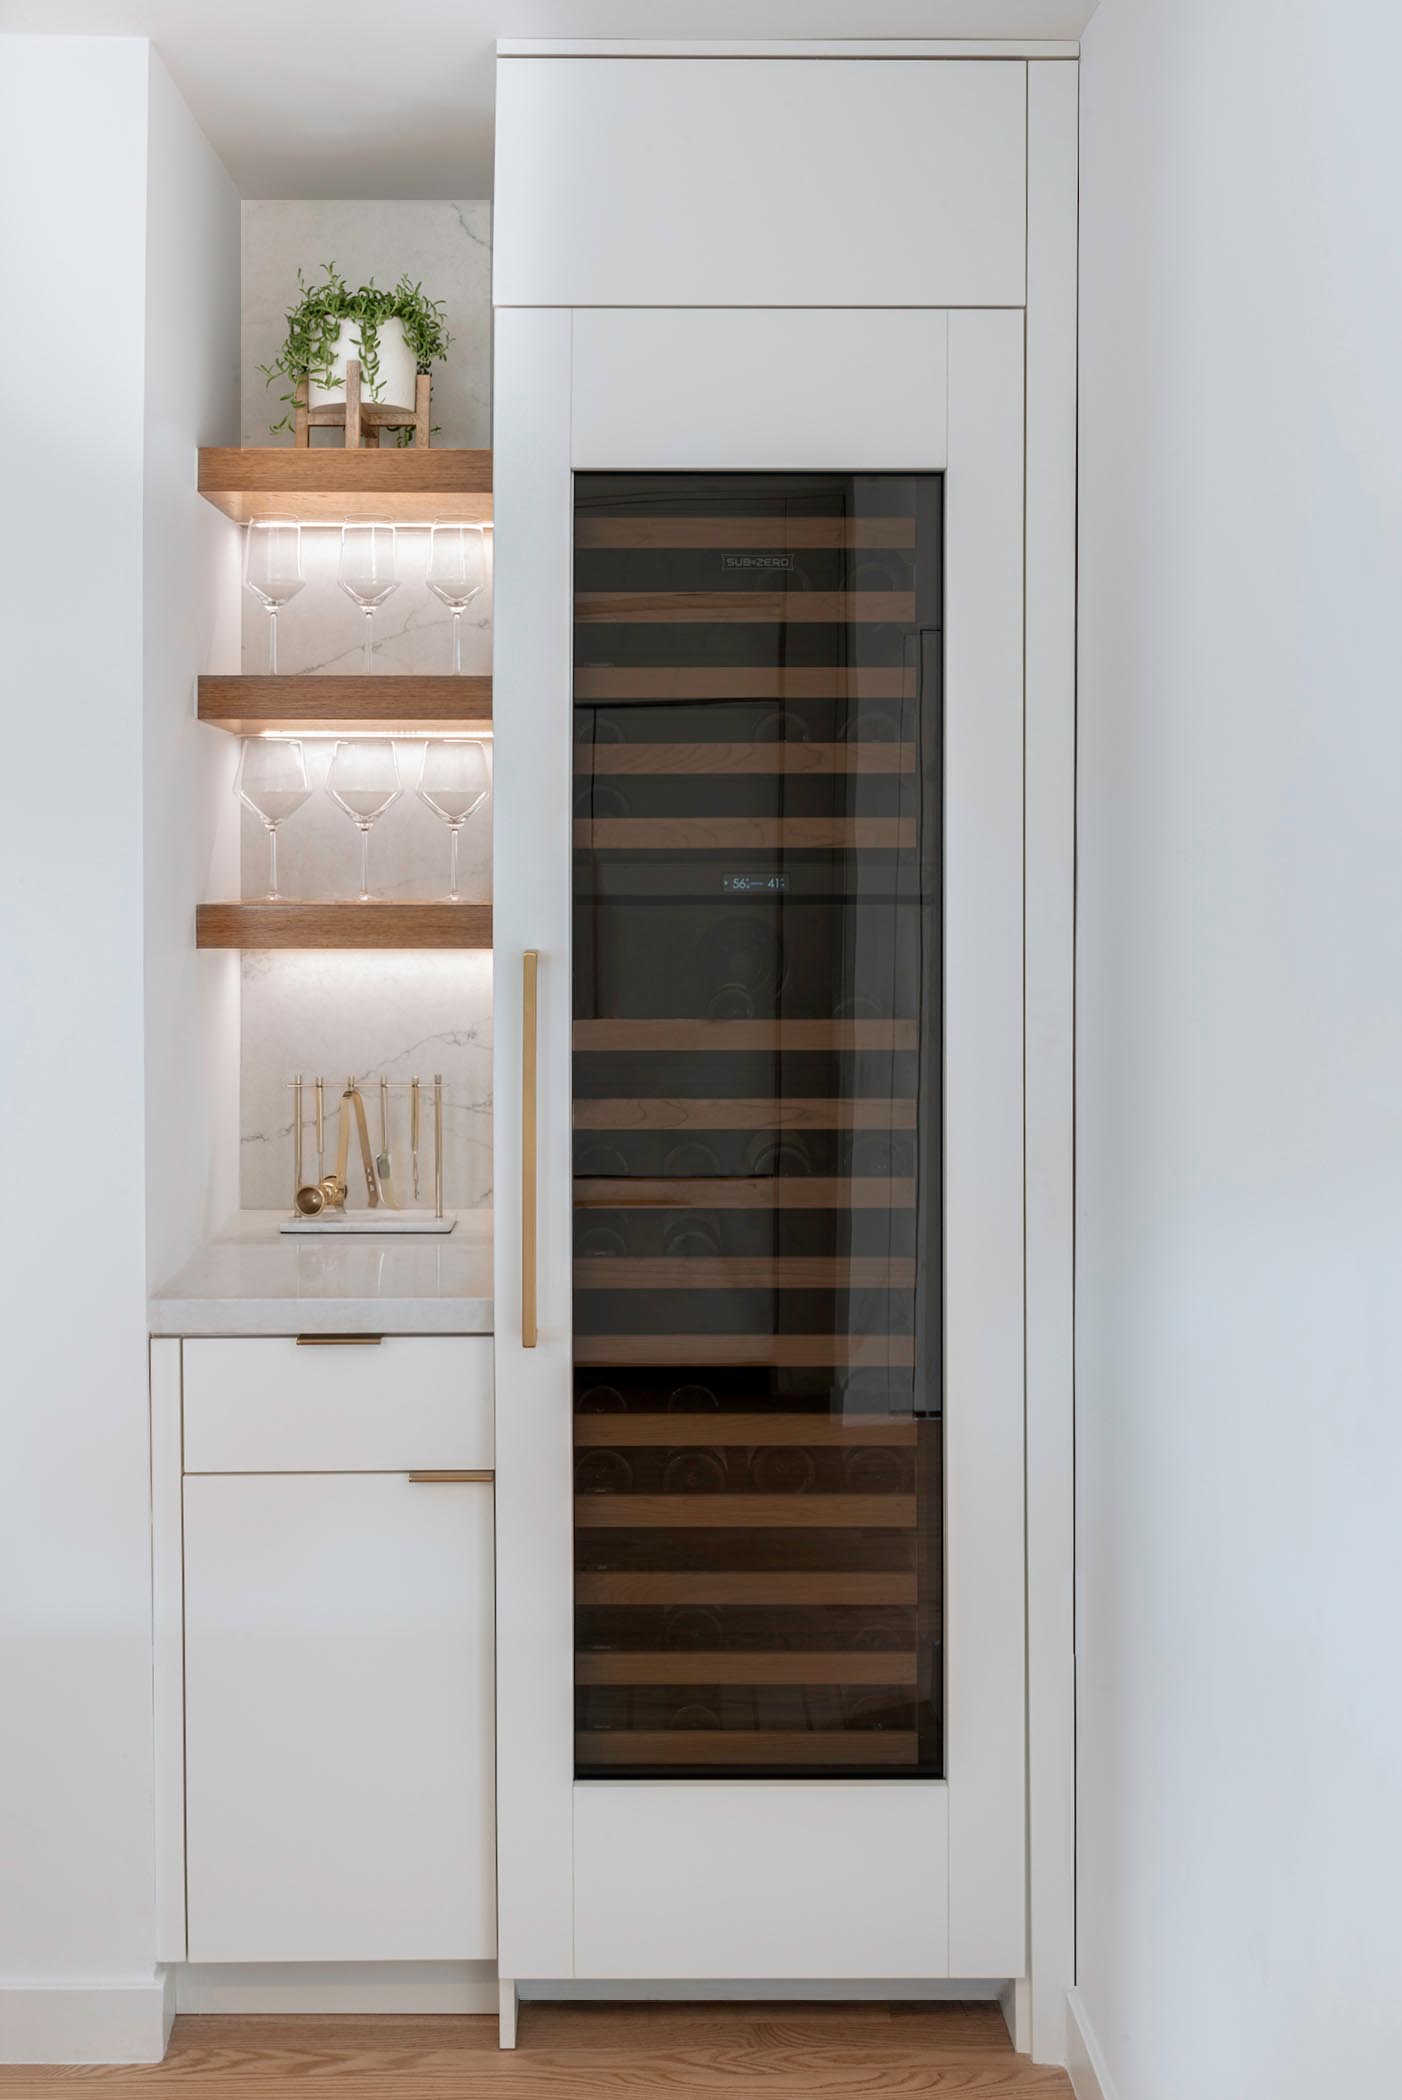 A built-in wine fridge and a small custom designed bar with storage and floating shelves with hidden lighting.